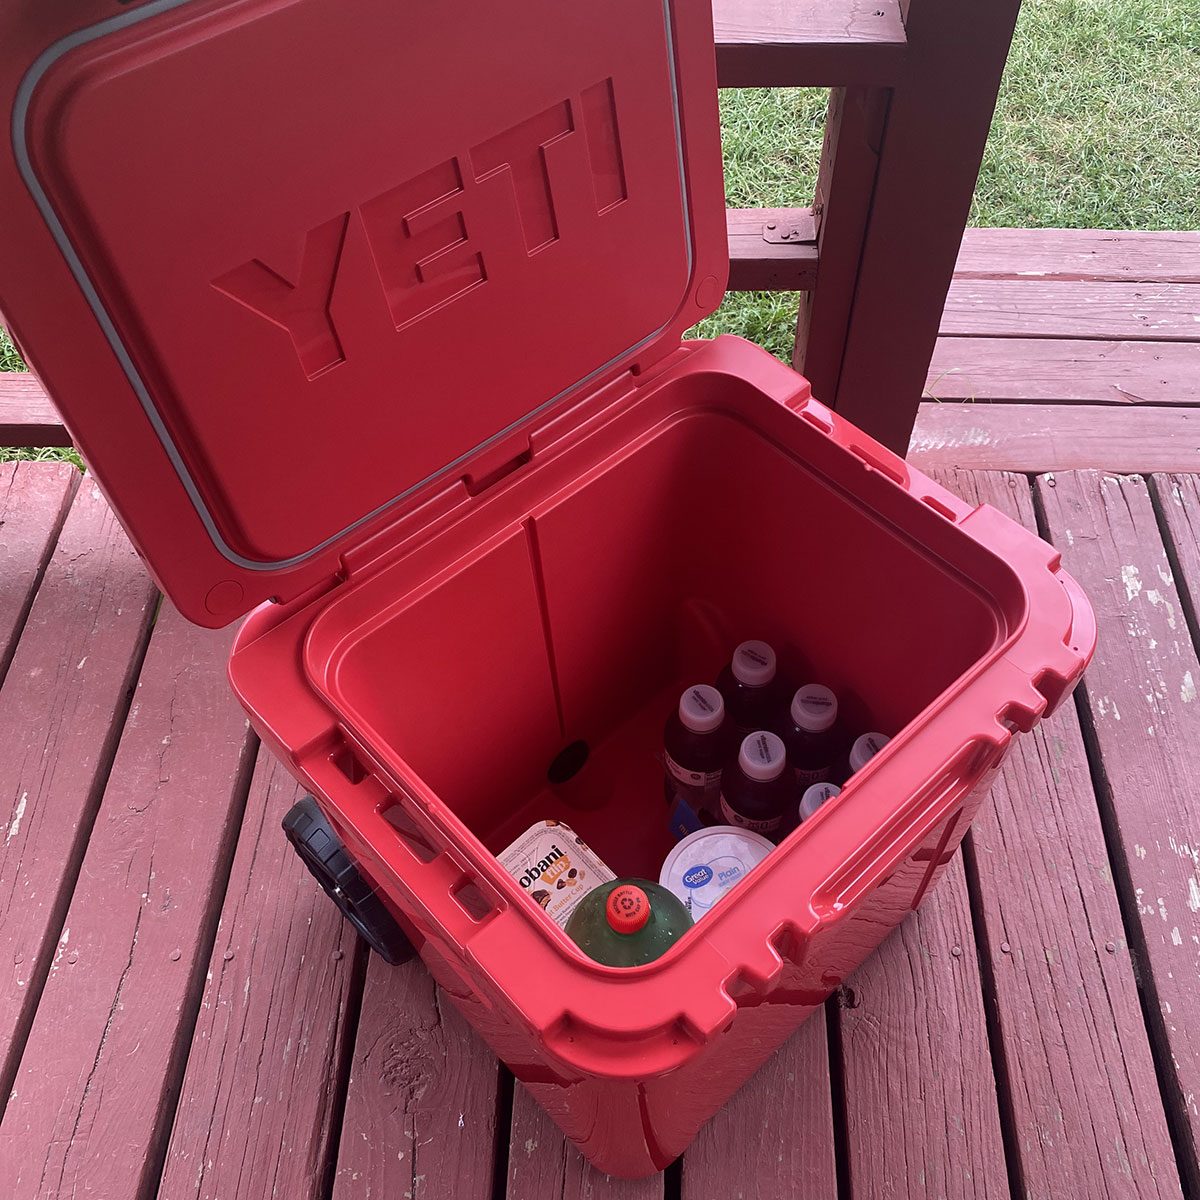 Oyster Tempo Cooler vs. Yeti Roadie: Which Stays Colder Longer?